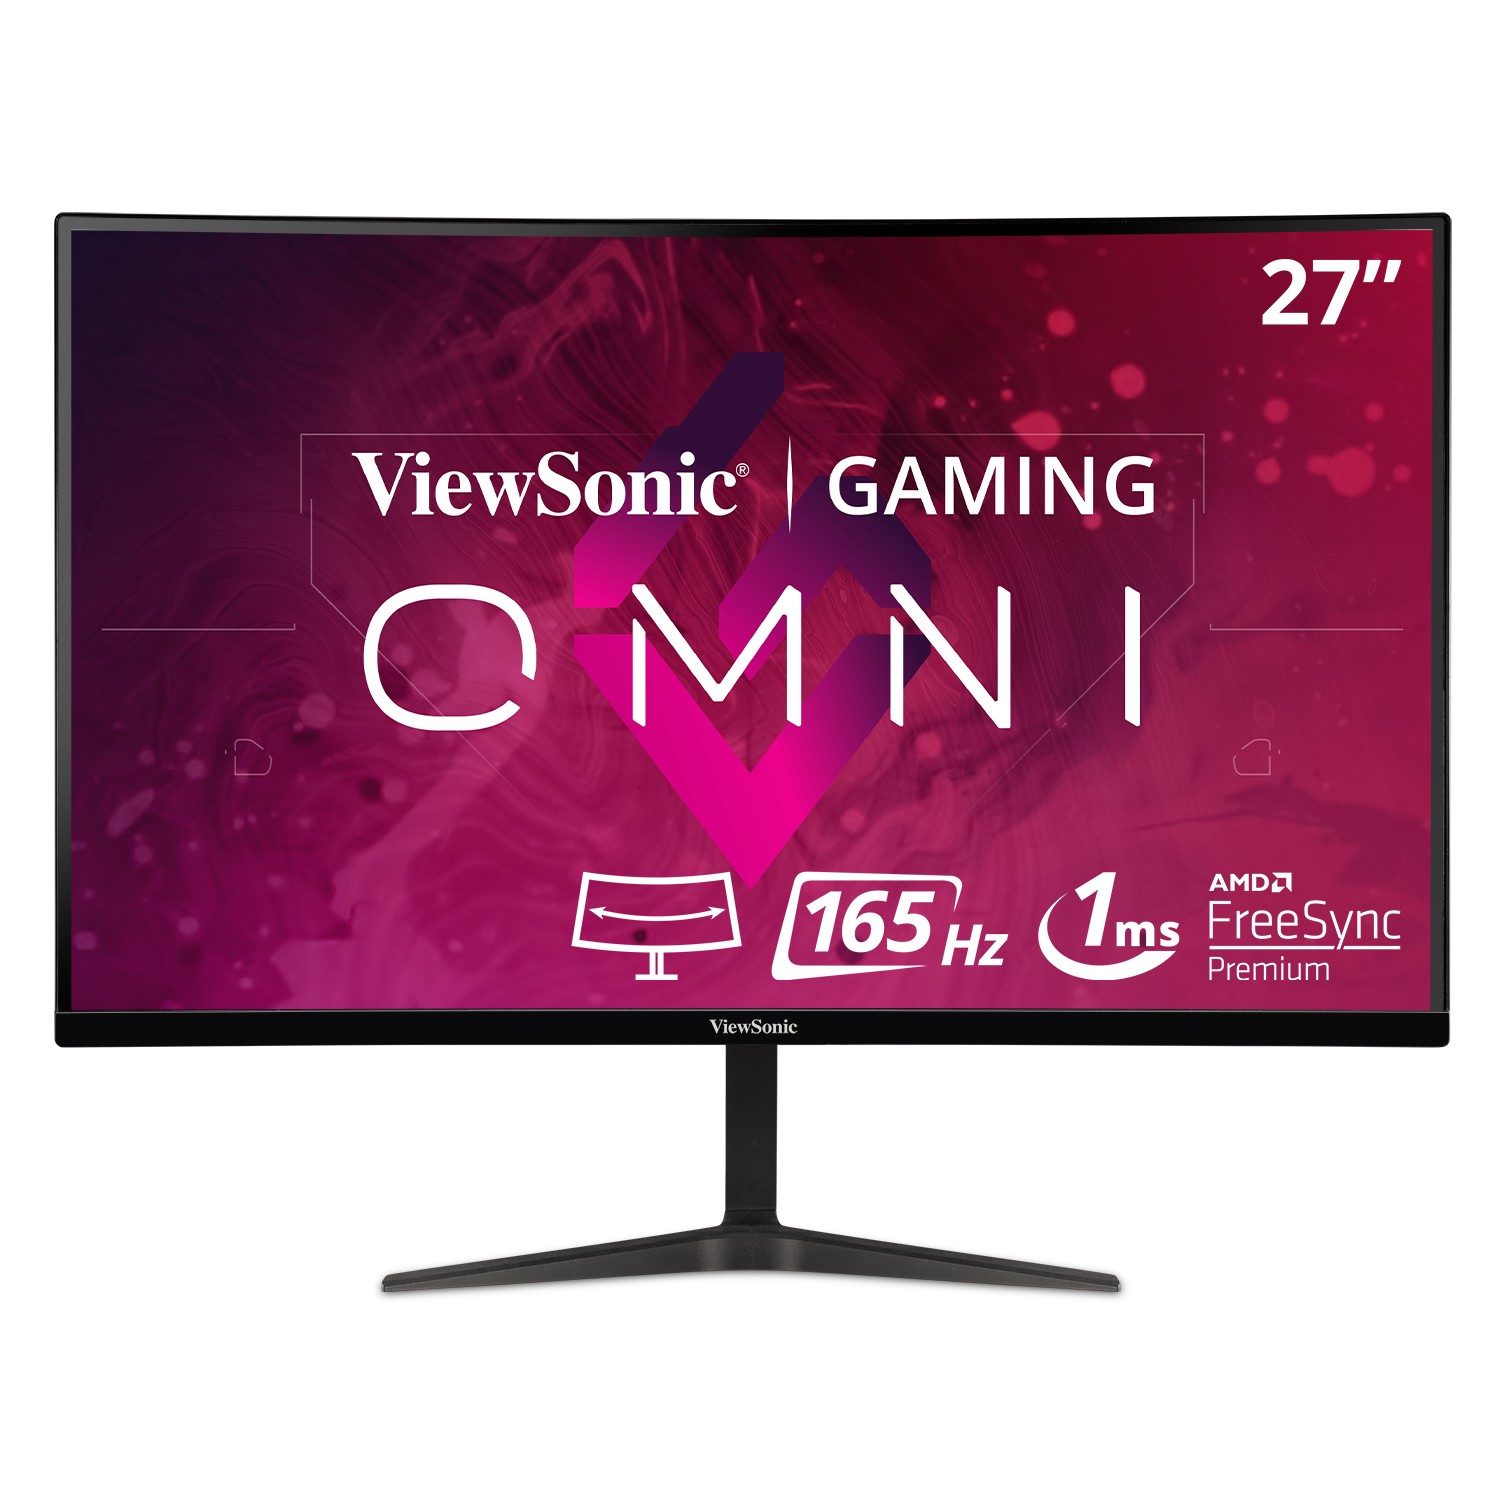 27 Inch Curved Gaming Monitor 144Hz 165Hz 2K,QHD 2560 x 1440p 1500R  Computer Monitor,16:9 Wide Display,1ms,FreeSync,98% sRGB,Eye Care HDR PC  Screen